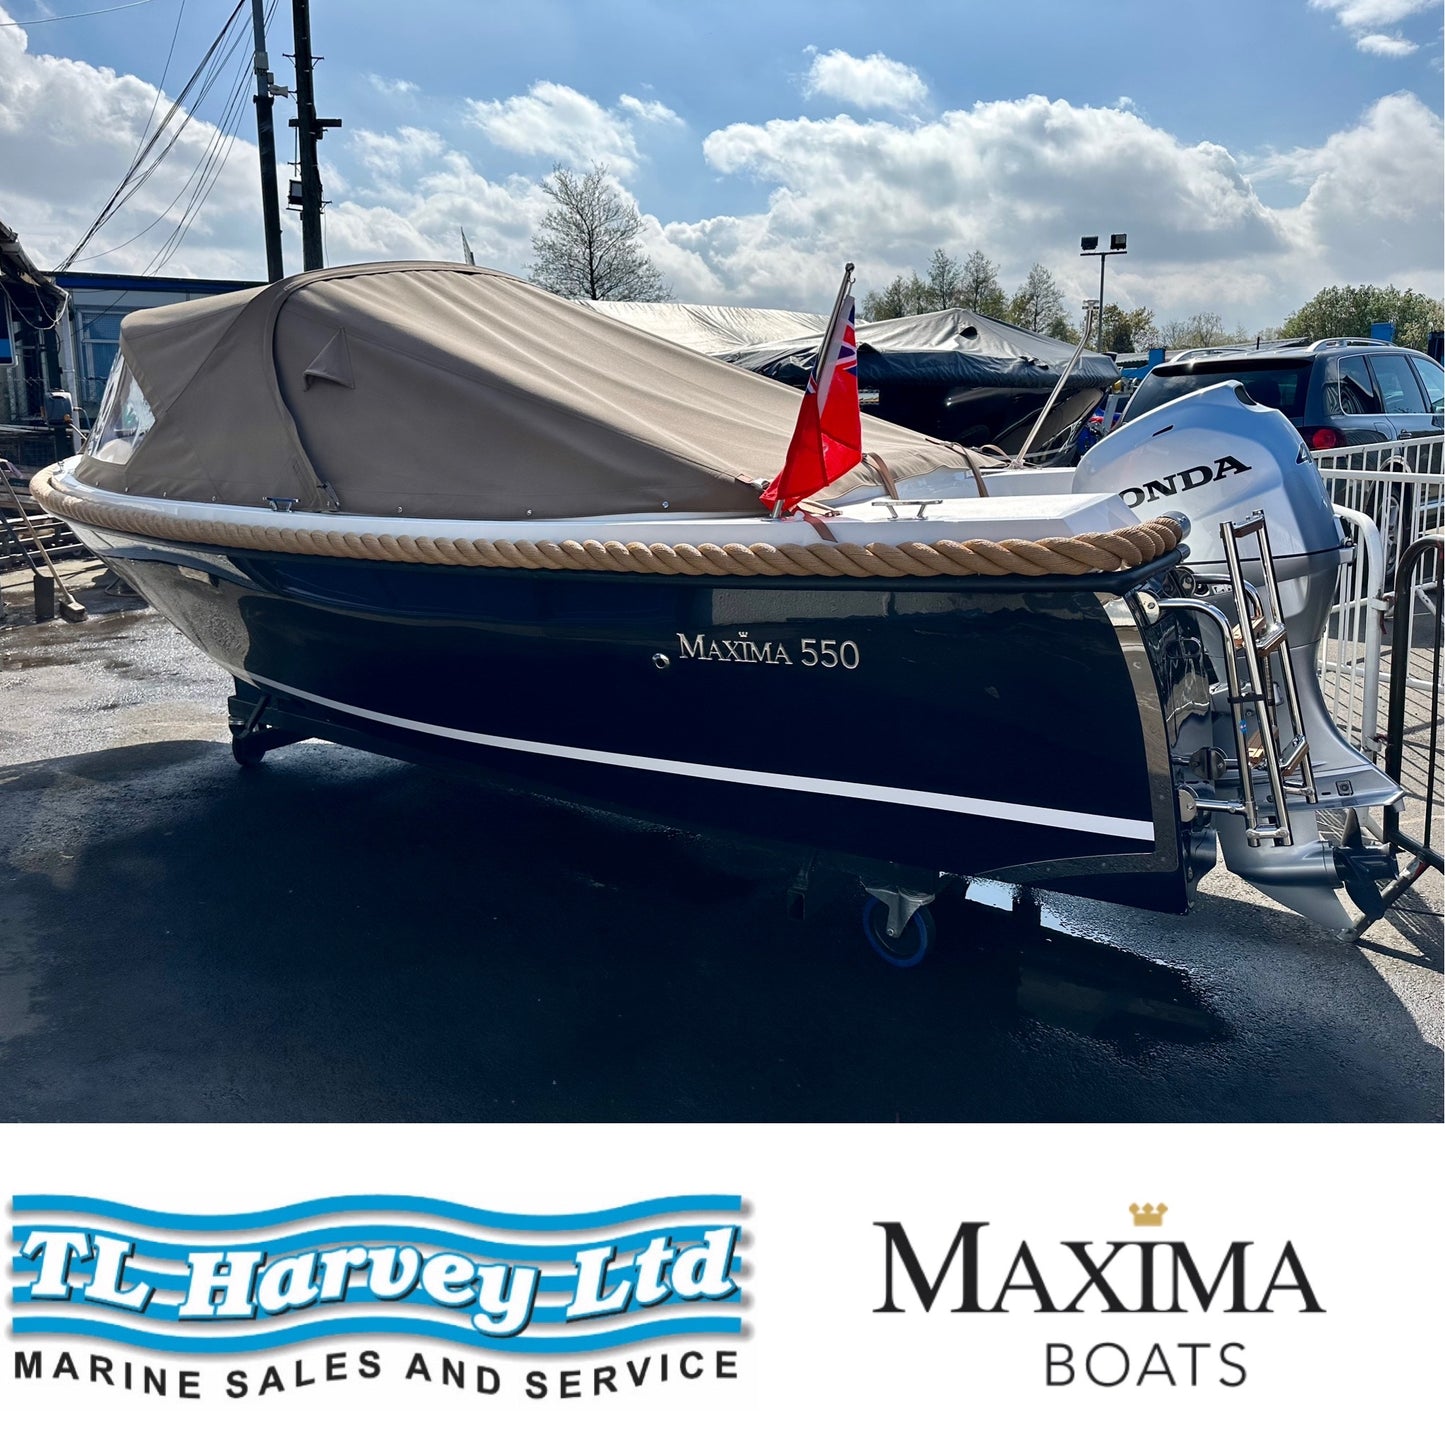 Maxima 550 Boat powered by Honda BF20 20hp In Stock Now